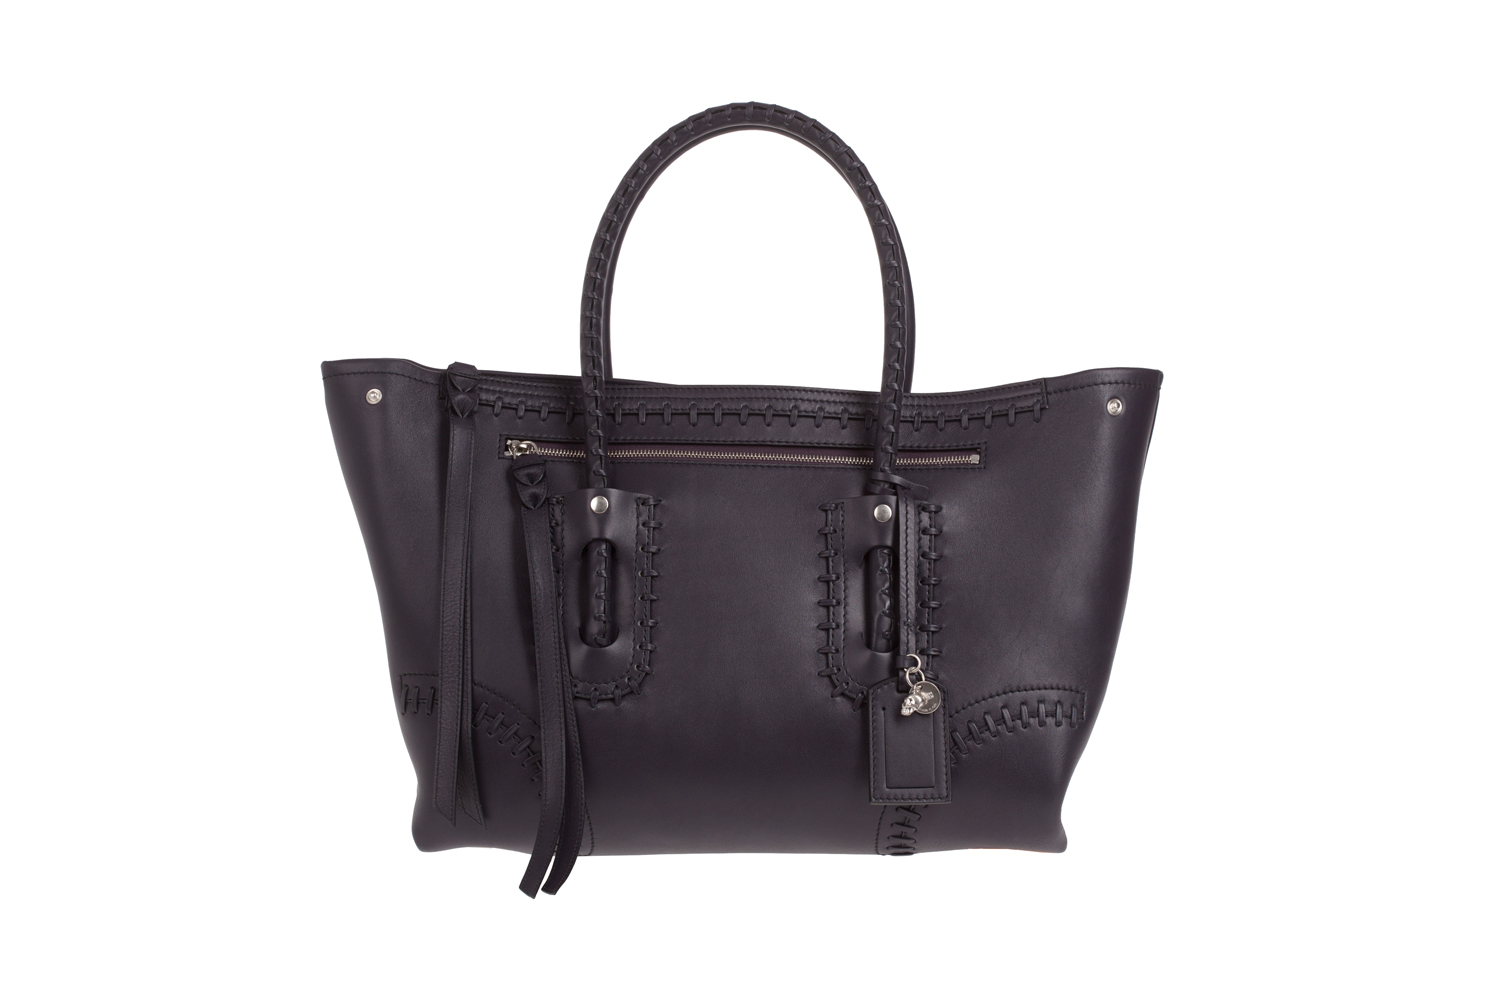 FOLK TOTE by Alexander McQueen in black leather AW12